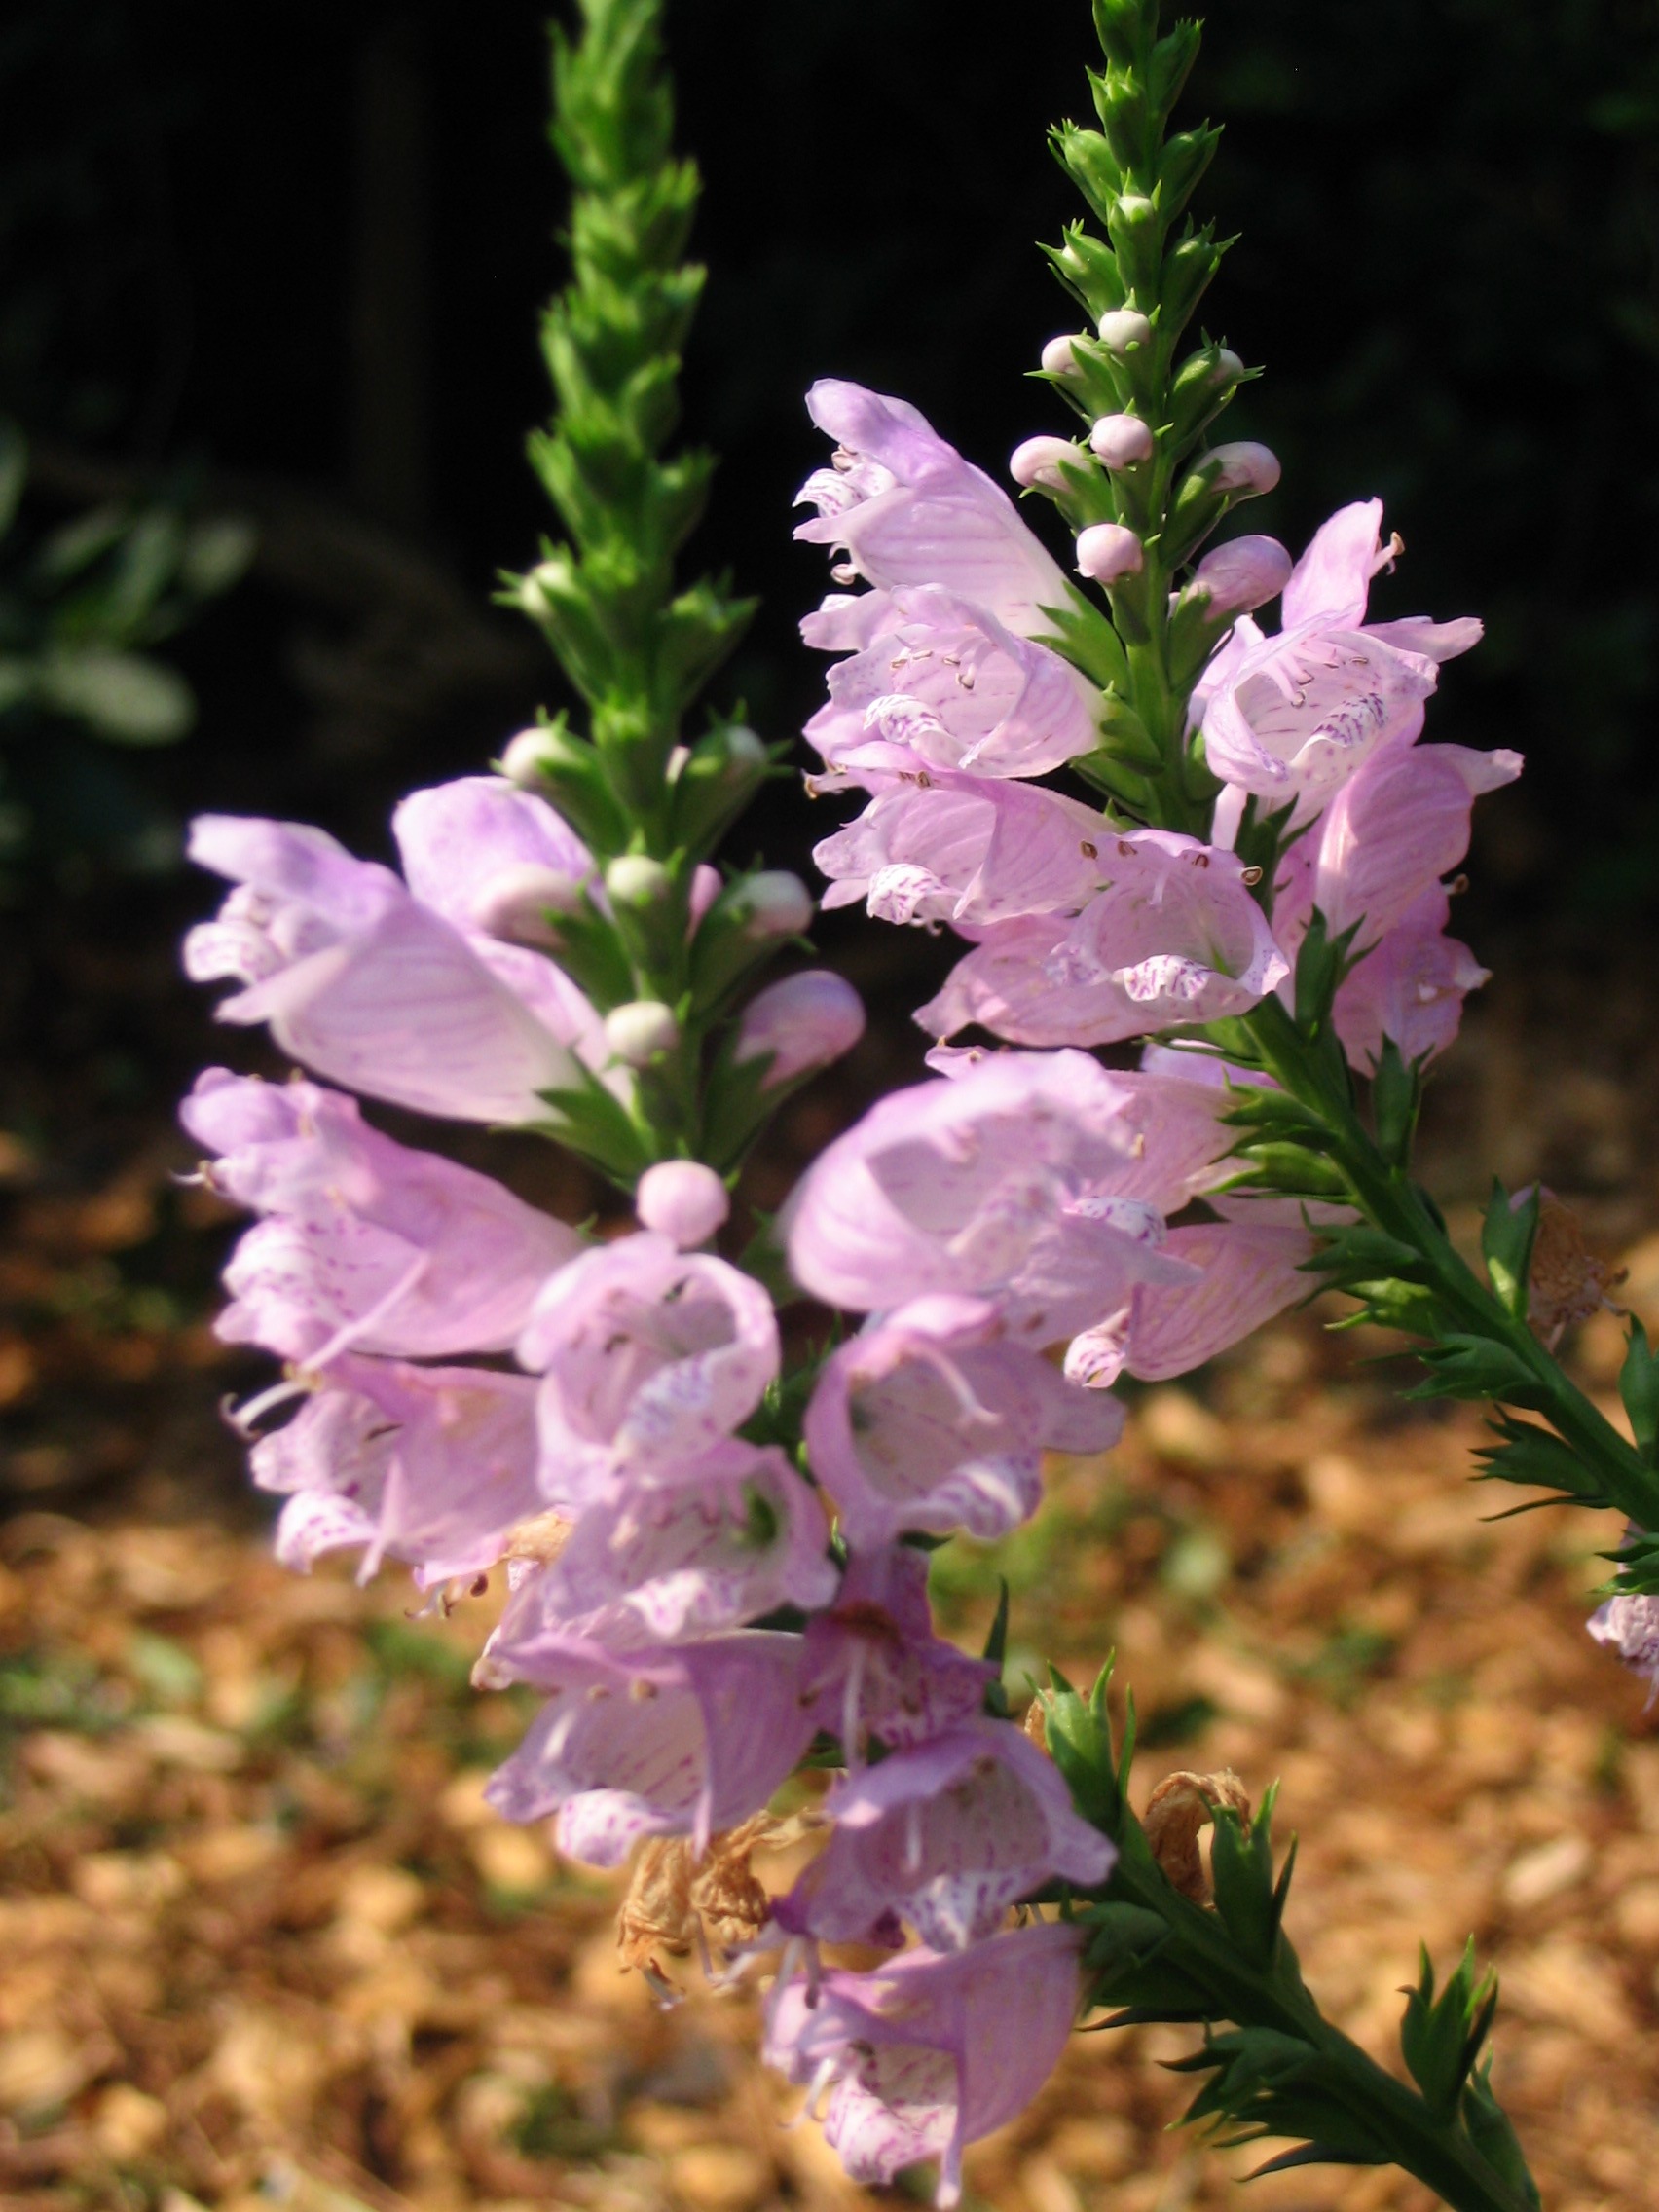 The Scientific Name is Physostegia virginiana. You will likely hear them called Obedient-plant. This picture shows the Individual flowers if moved left or right on the inflorescence, will stay where you moved them, hence the common name Obedient Plant of Physostegia virginiana